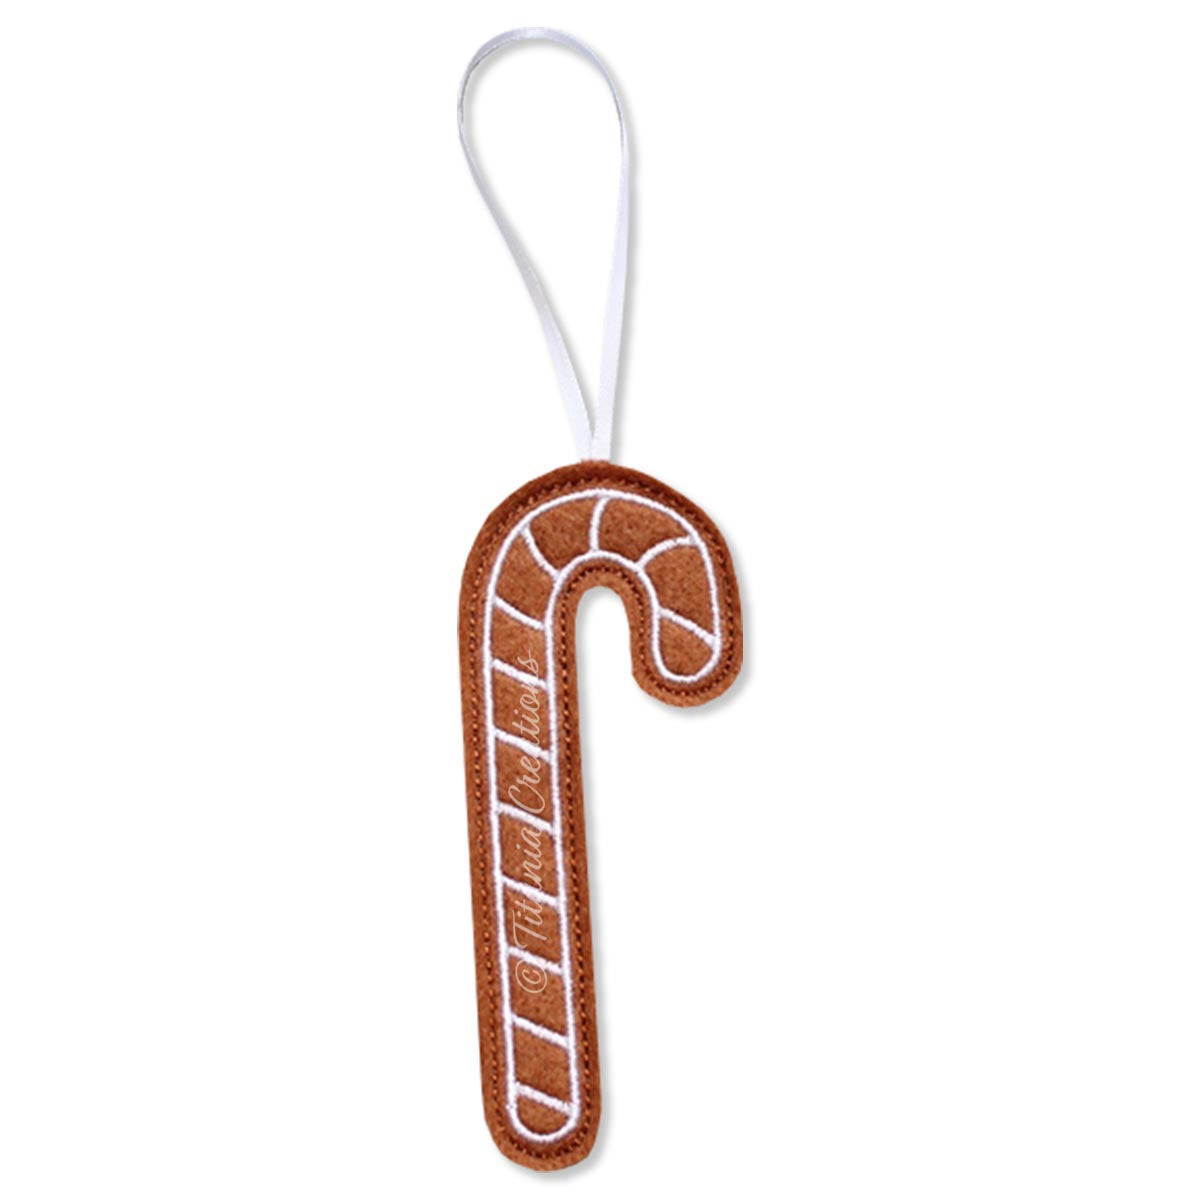 ITH Iced Gingerbread Candy Cane 4x4